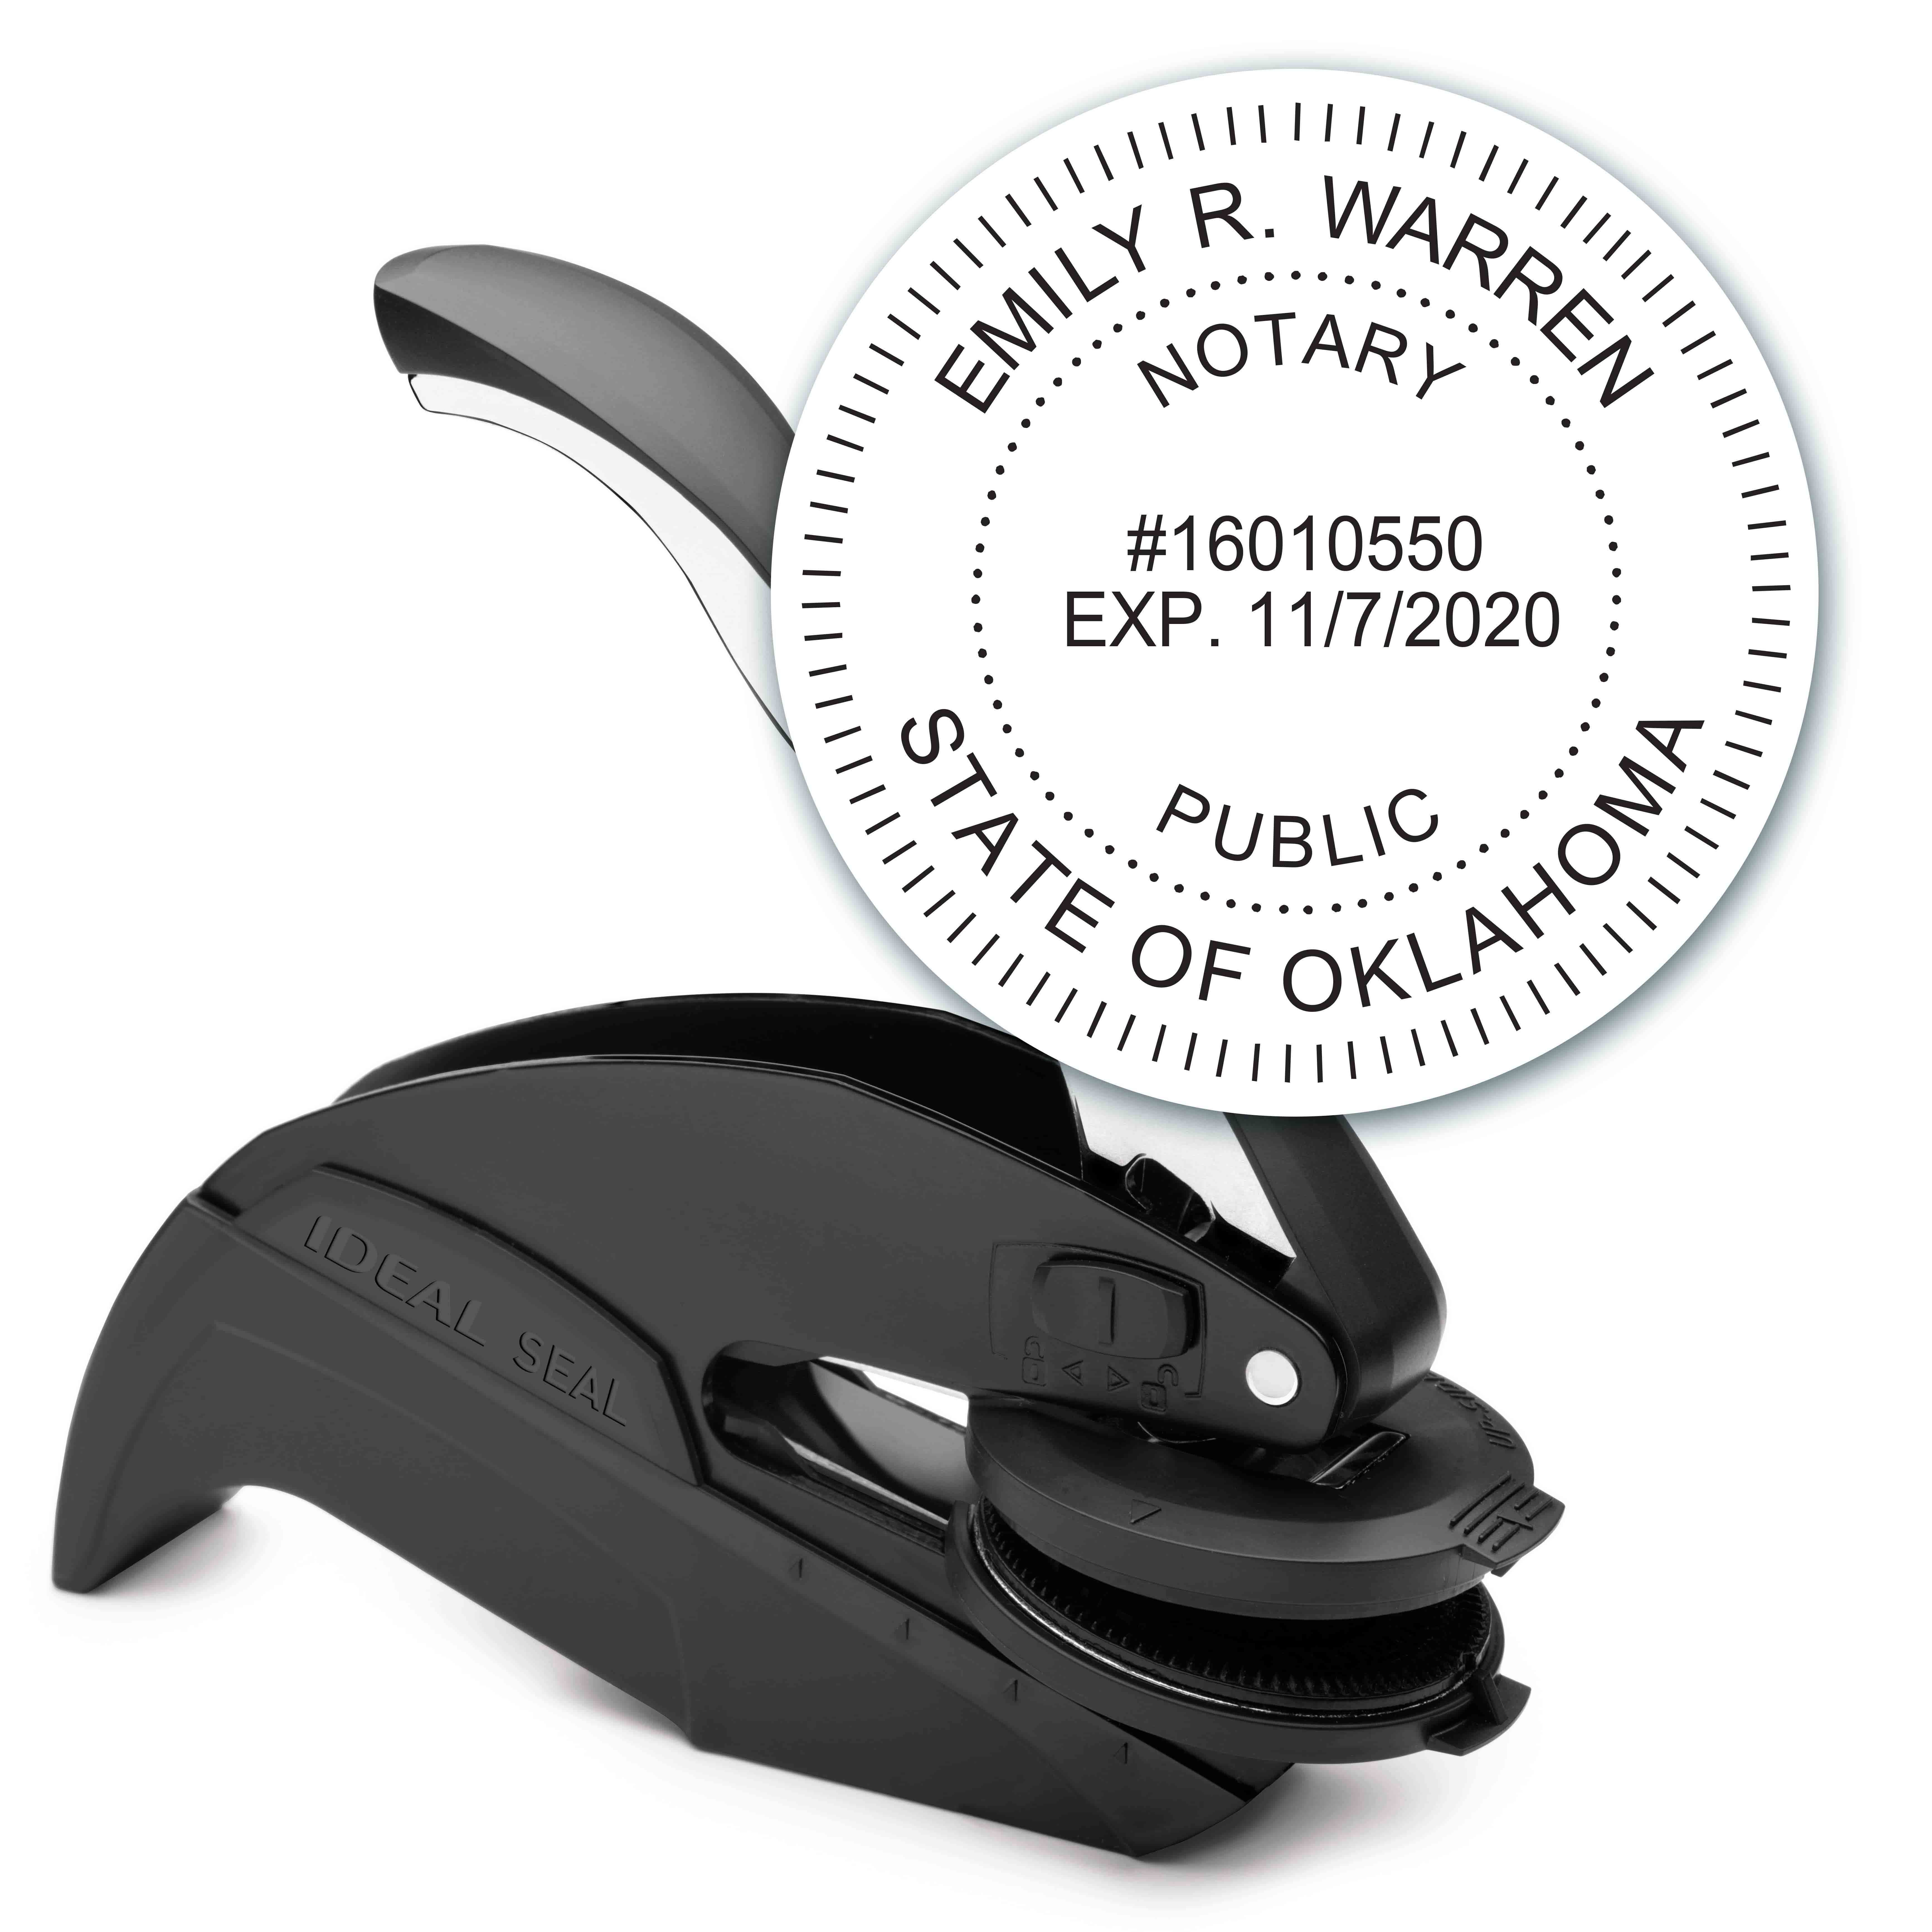 Notary Seal Round Embosser for Oklahoma State - Includes Gold Burst Seal Labels (42 count)	